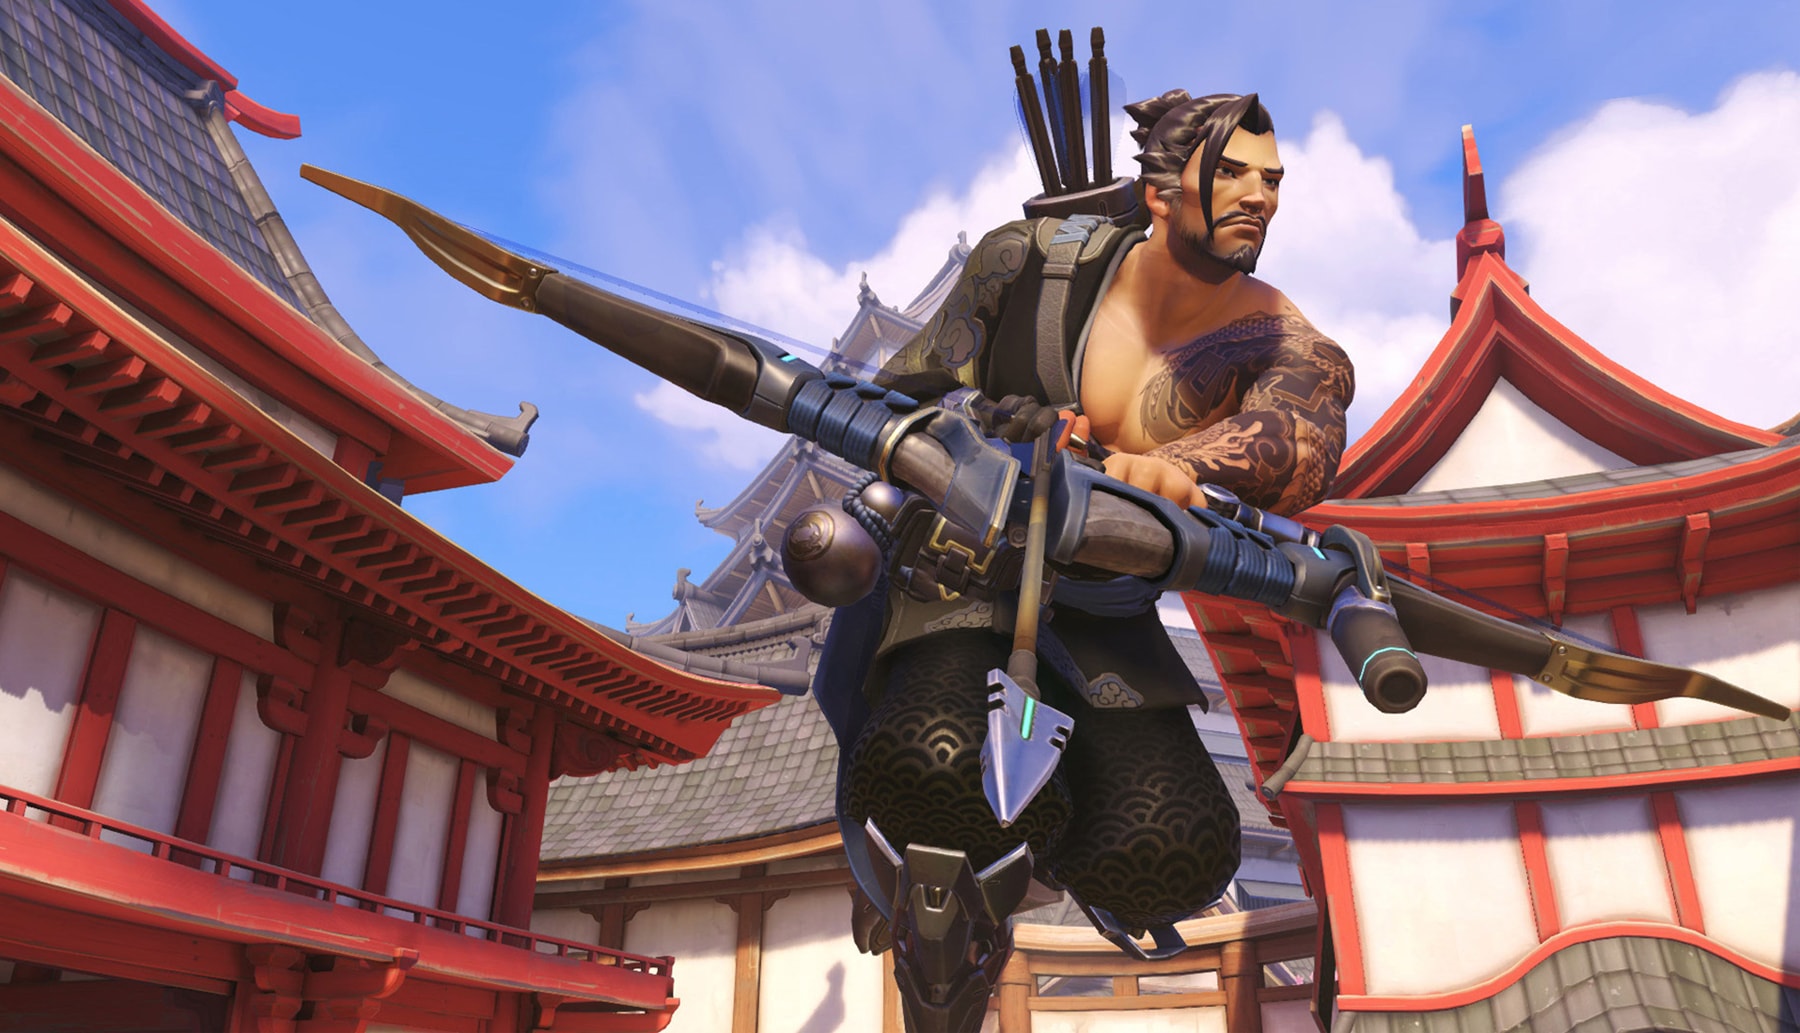 Overwatch character Hanzo wielding his storm bow among several pagodas